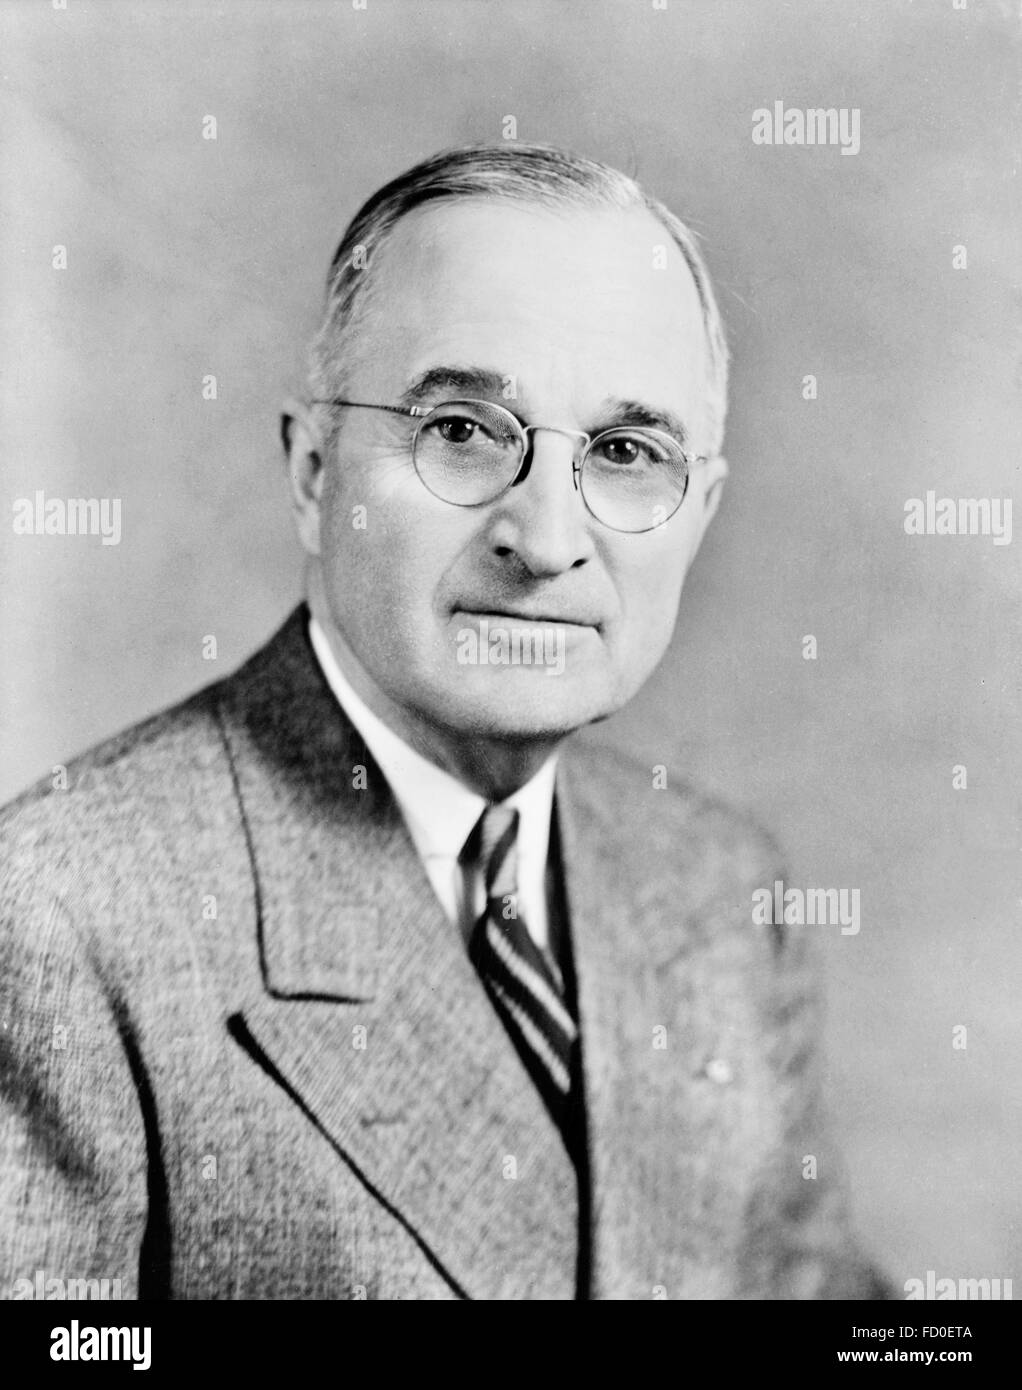 Harry S Truman, the 33rd President of the USA, June 1945 Stock Photo